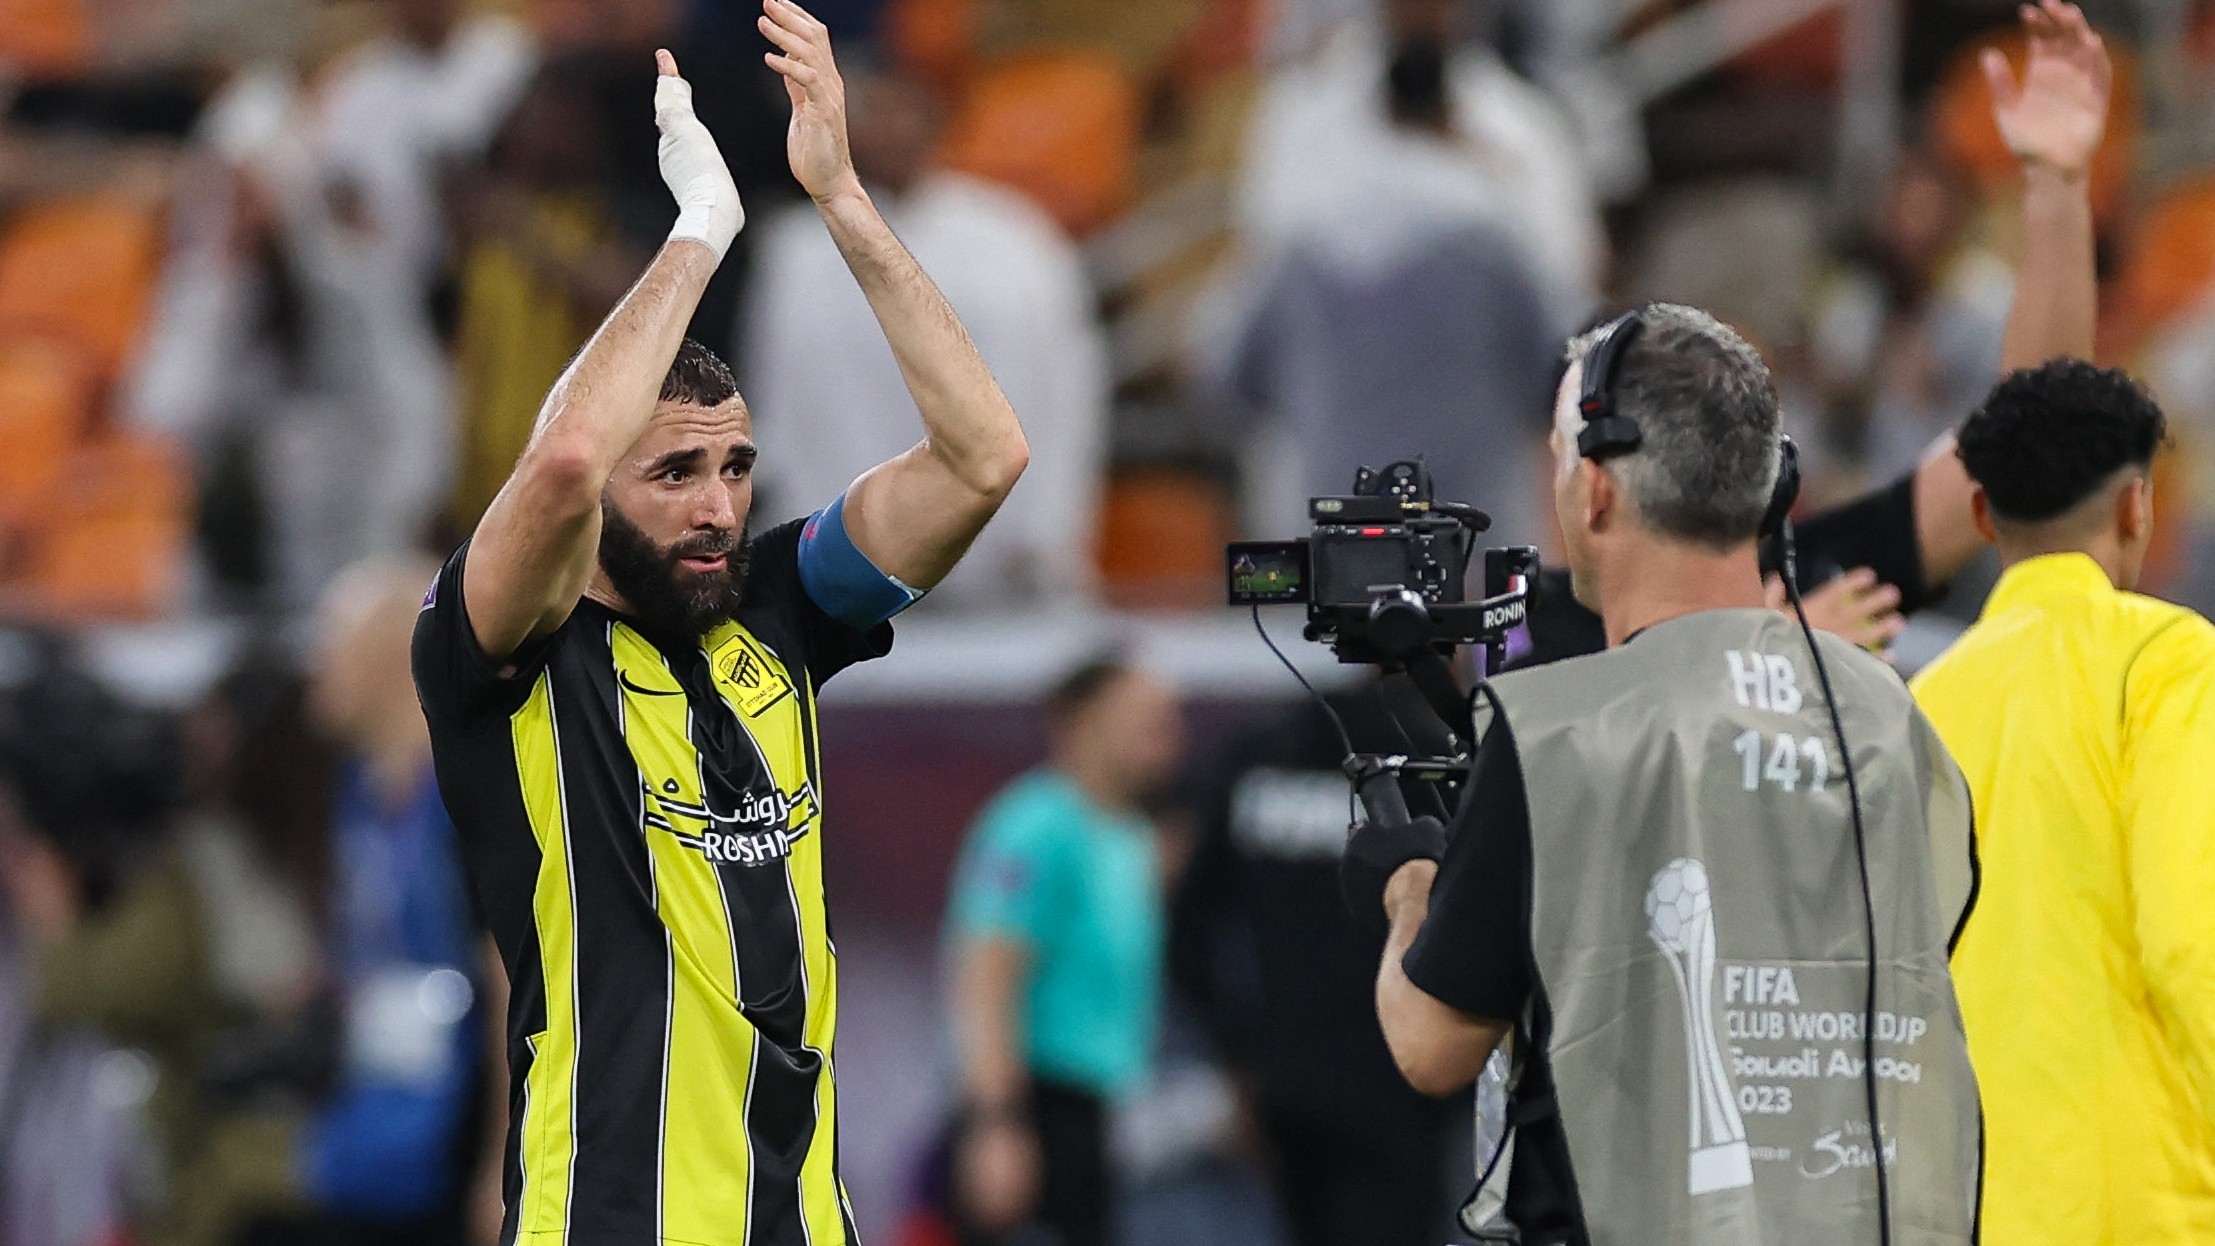 Ittihad's French forward Karim Benzema (L) applauses at the end of the FIFA Club World Cup first round football match between Al-Ittihad and Auckland City at the King Abdullah Sports City stadium in Jeddah, on December 12. (AFP)